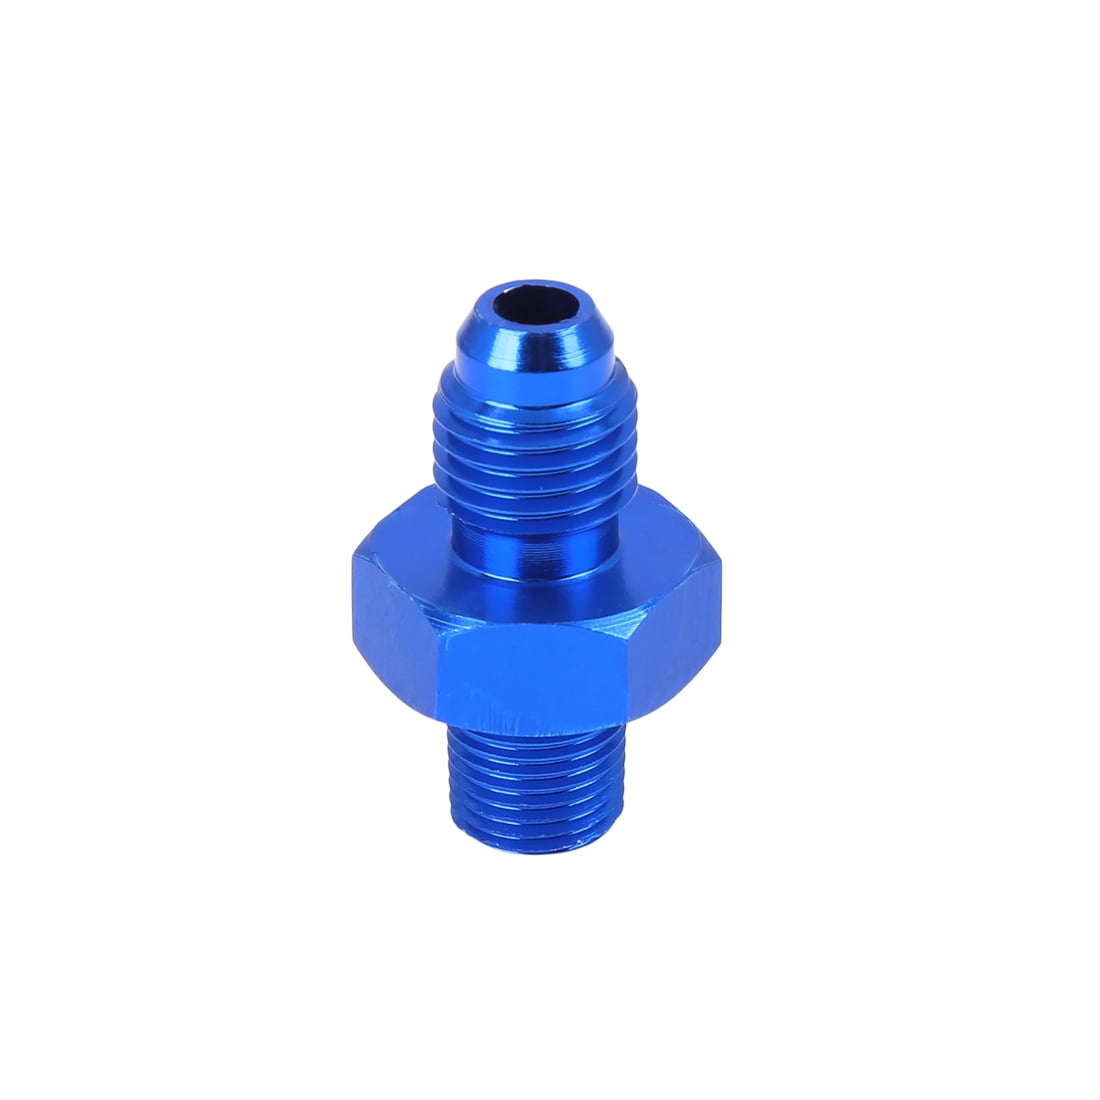 Aluminum Alloy Male Flare AN6 To 1/8 NPT Straight Fuel Oil Fitting Adapter Qii lu Fitting Adapter